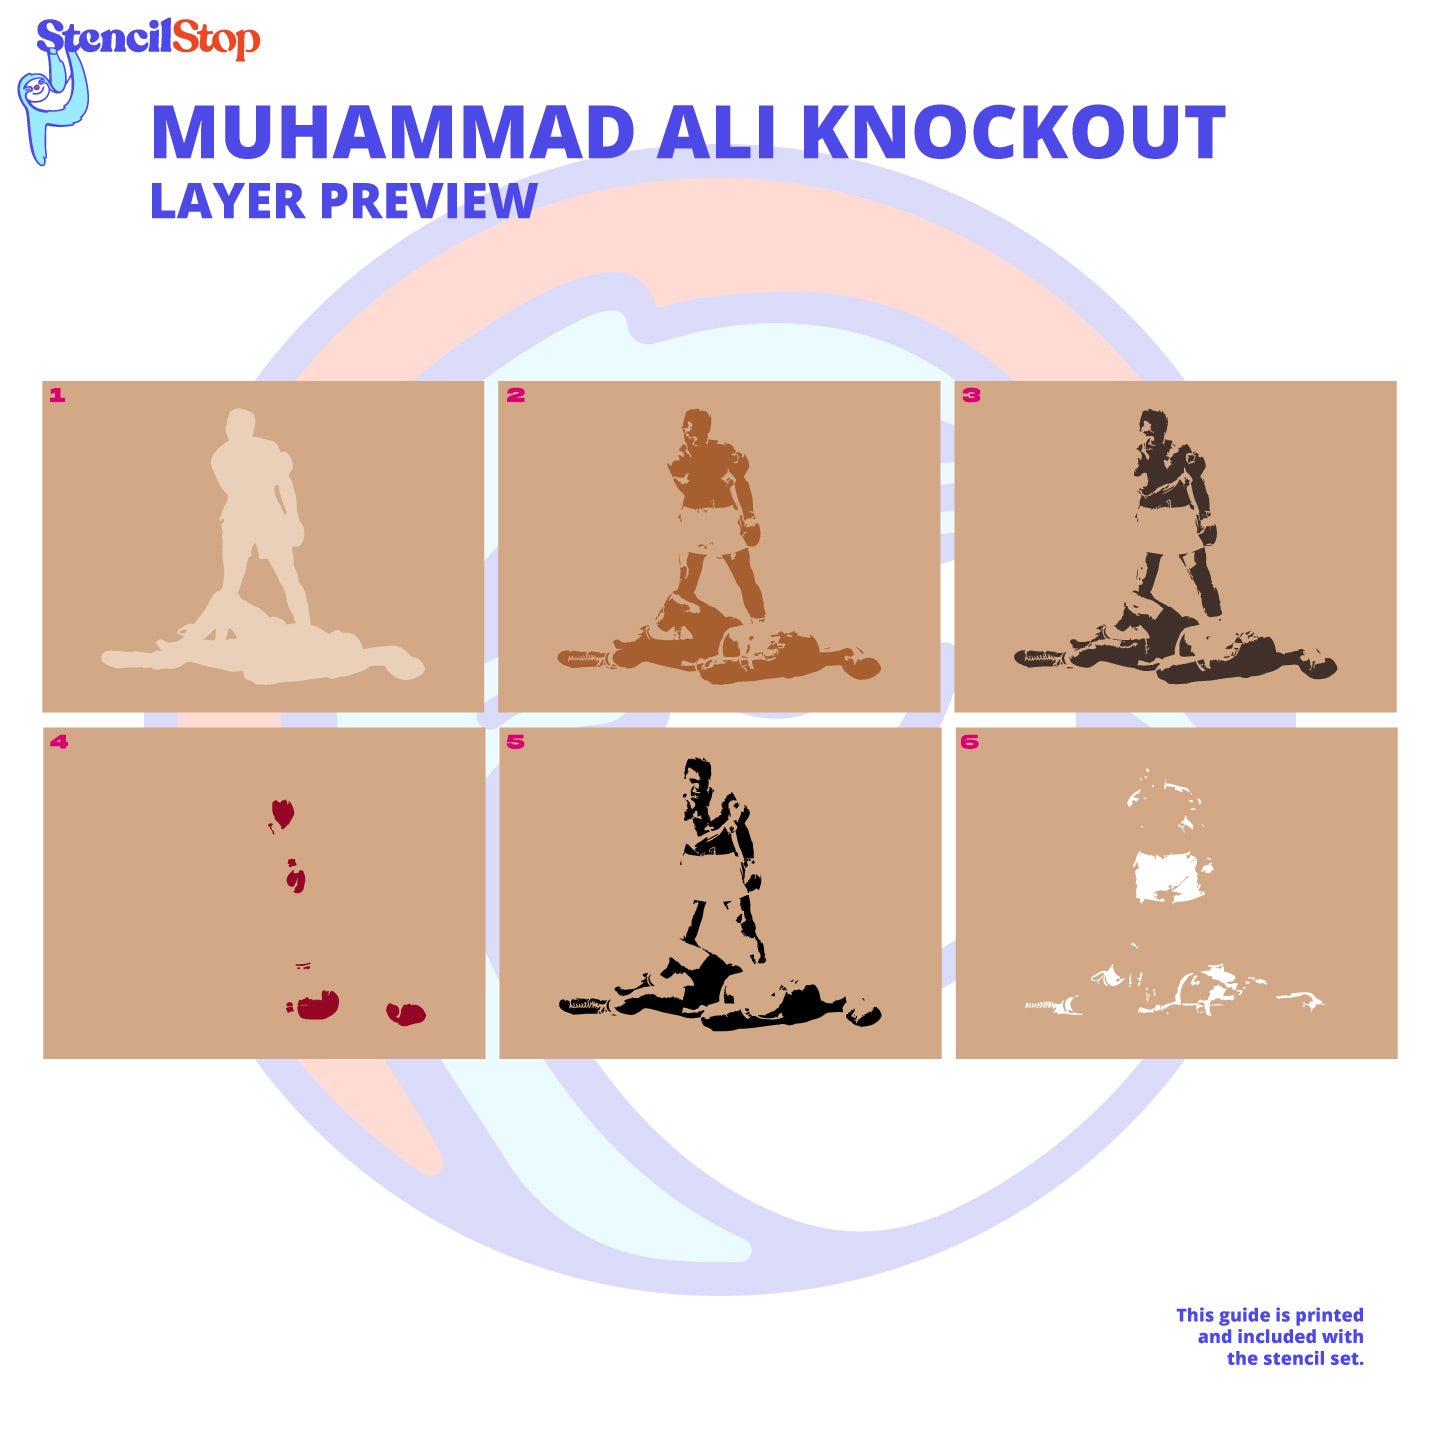 Muhammad Ali "Knockout" Layer Stencil Preview